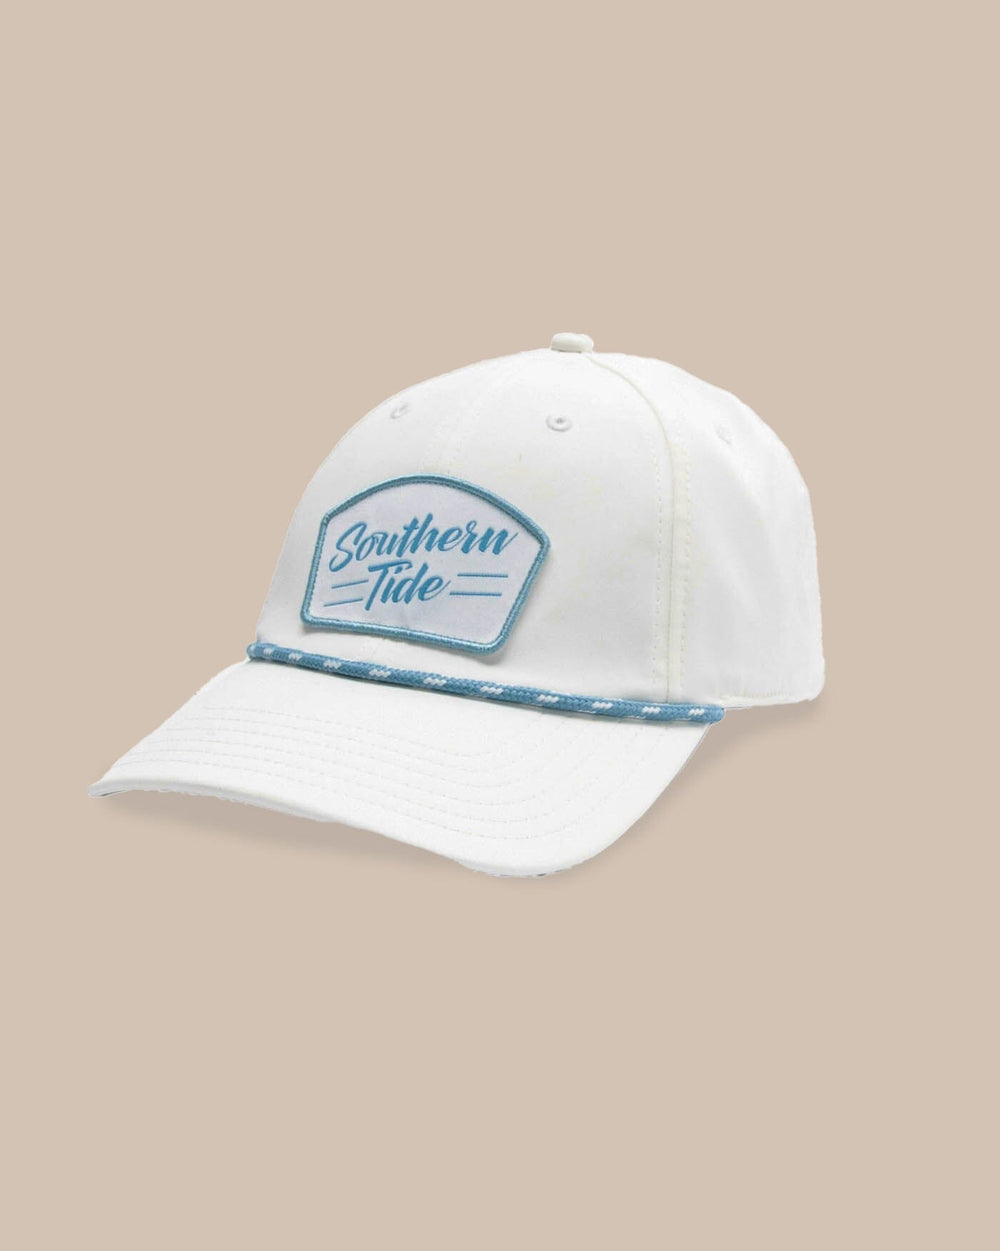 The front view of the Southern Tide Bridge City Performance Hat by Southern Tide - White